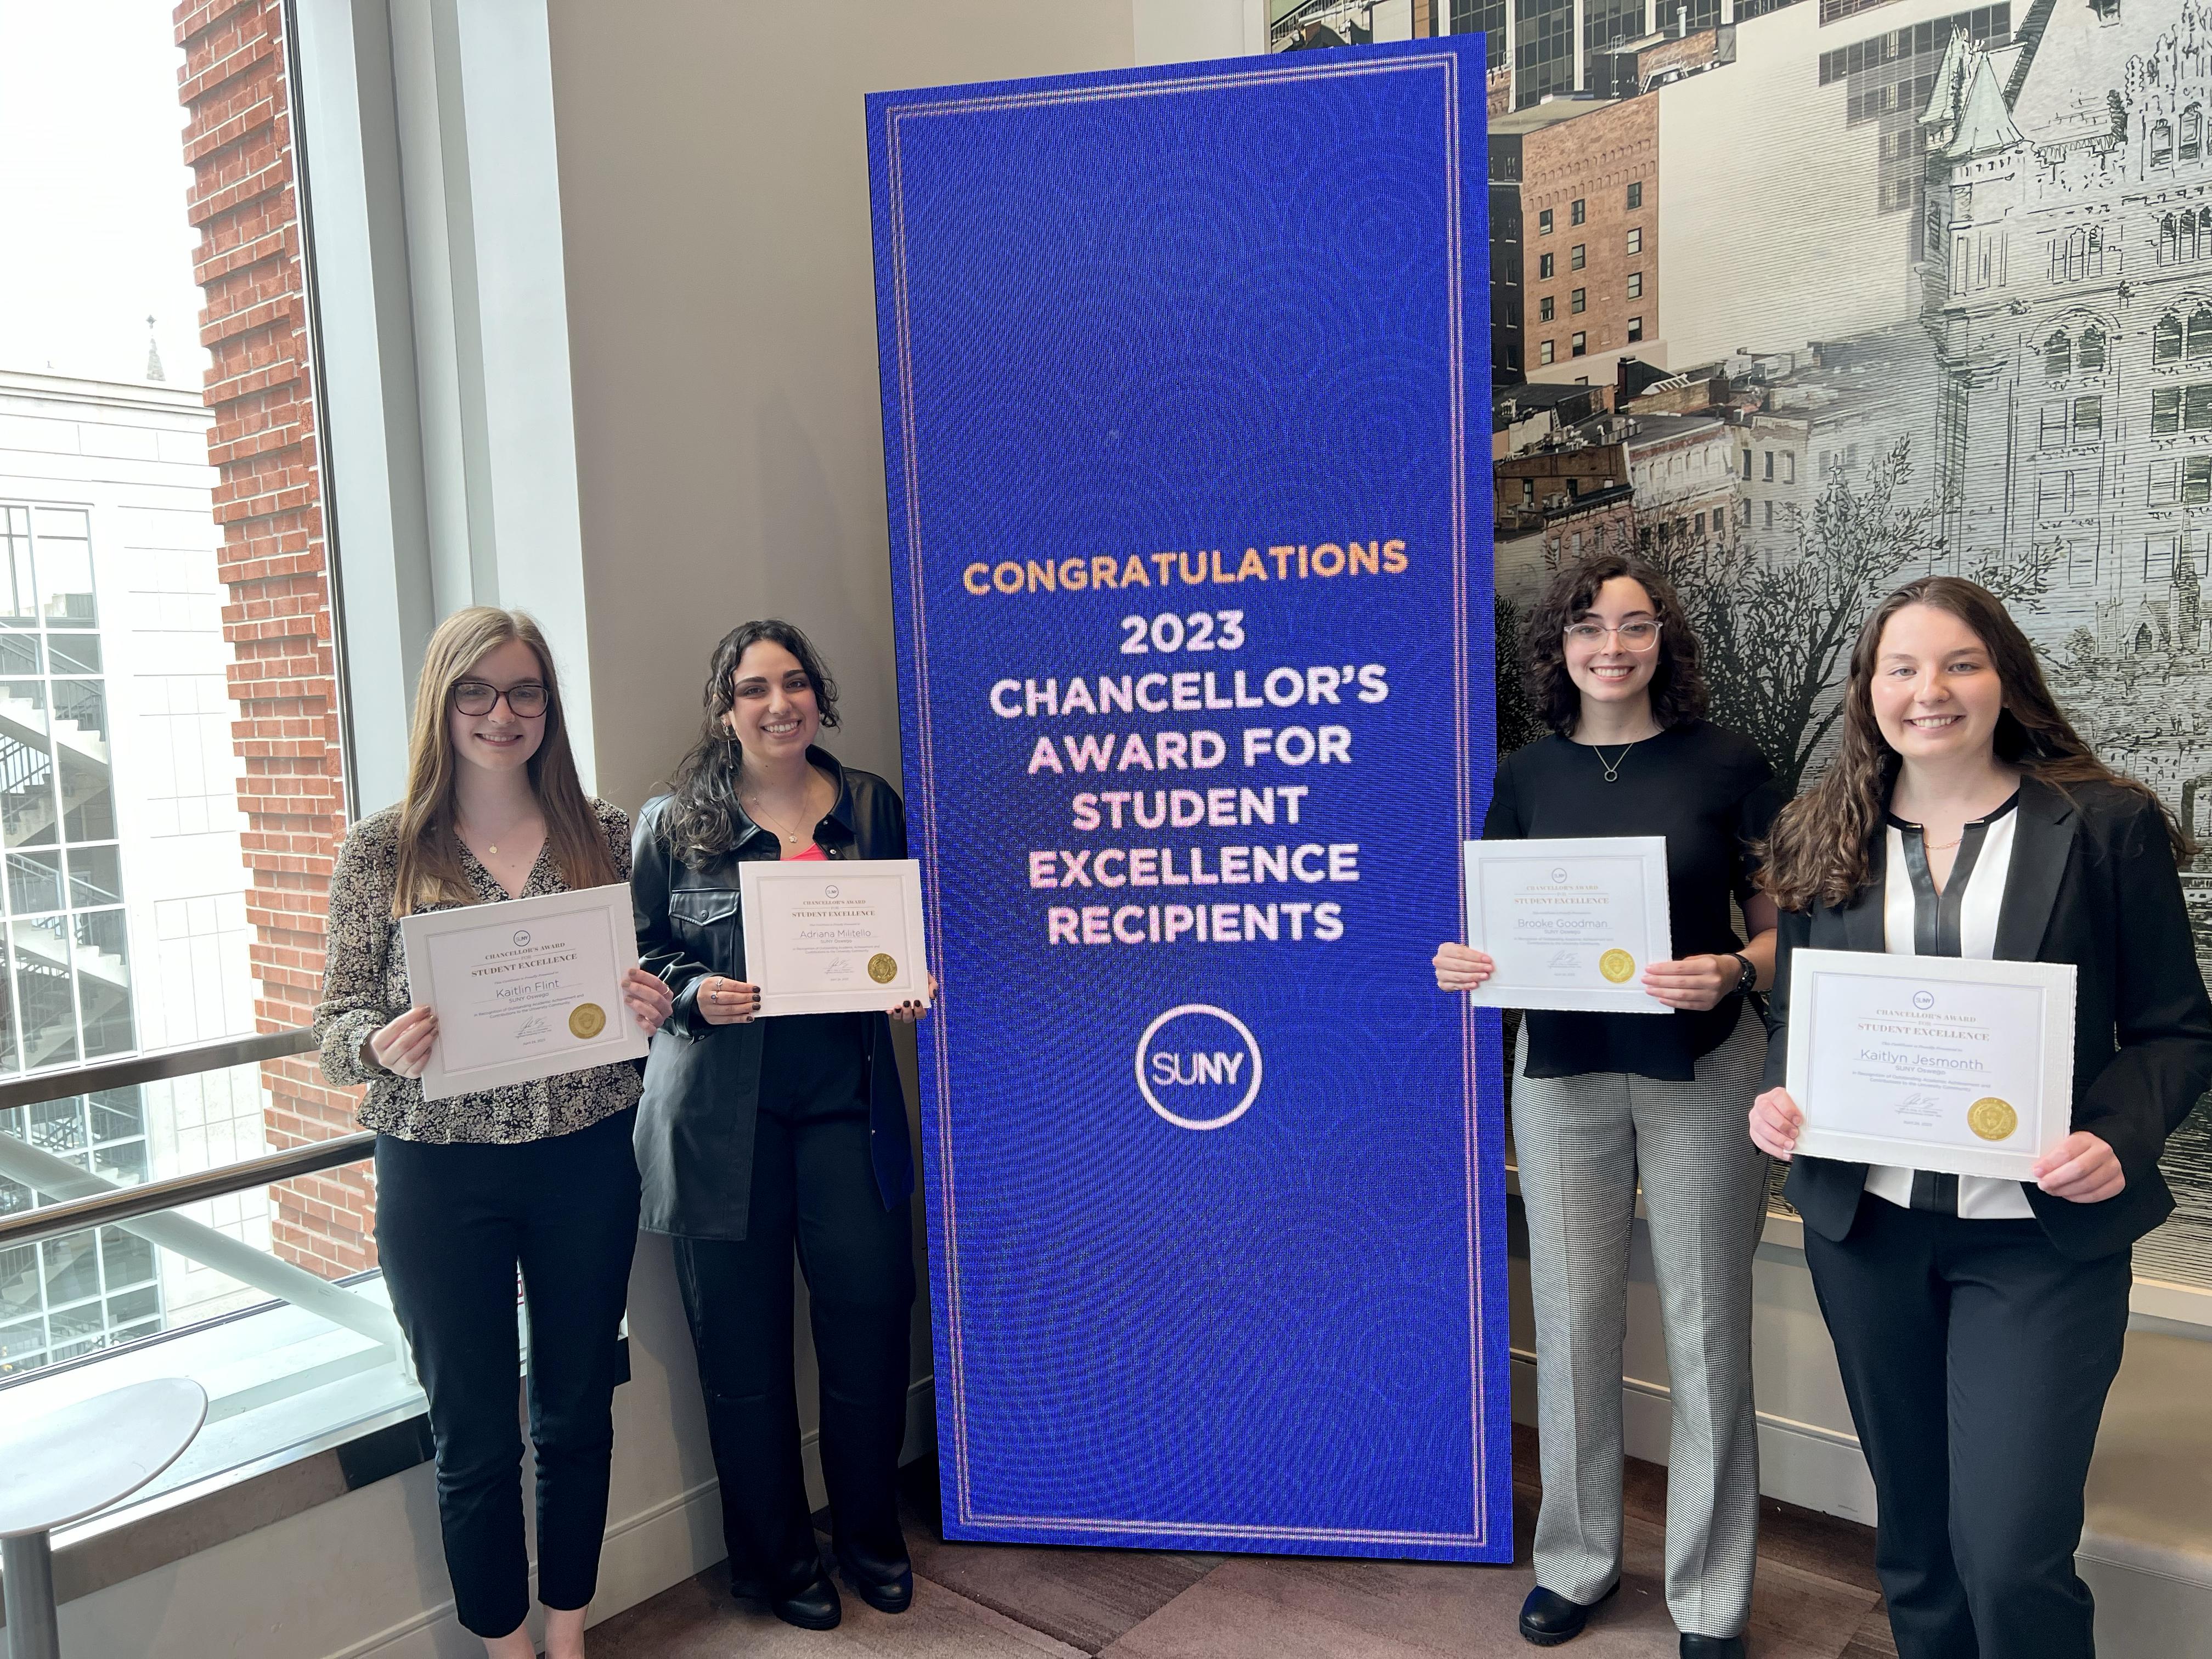 From left, Kaitlin Flint, Adriana Militello, Brooke Goodman and Kaitlyn Jesmonth at the April ceremony in Albany celebrating their Chancellor's Awards for Student Excellence